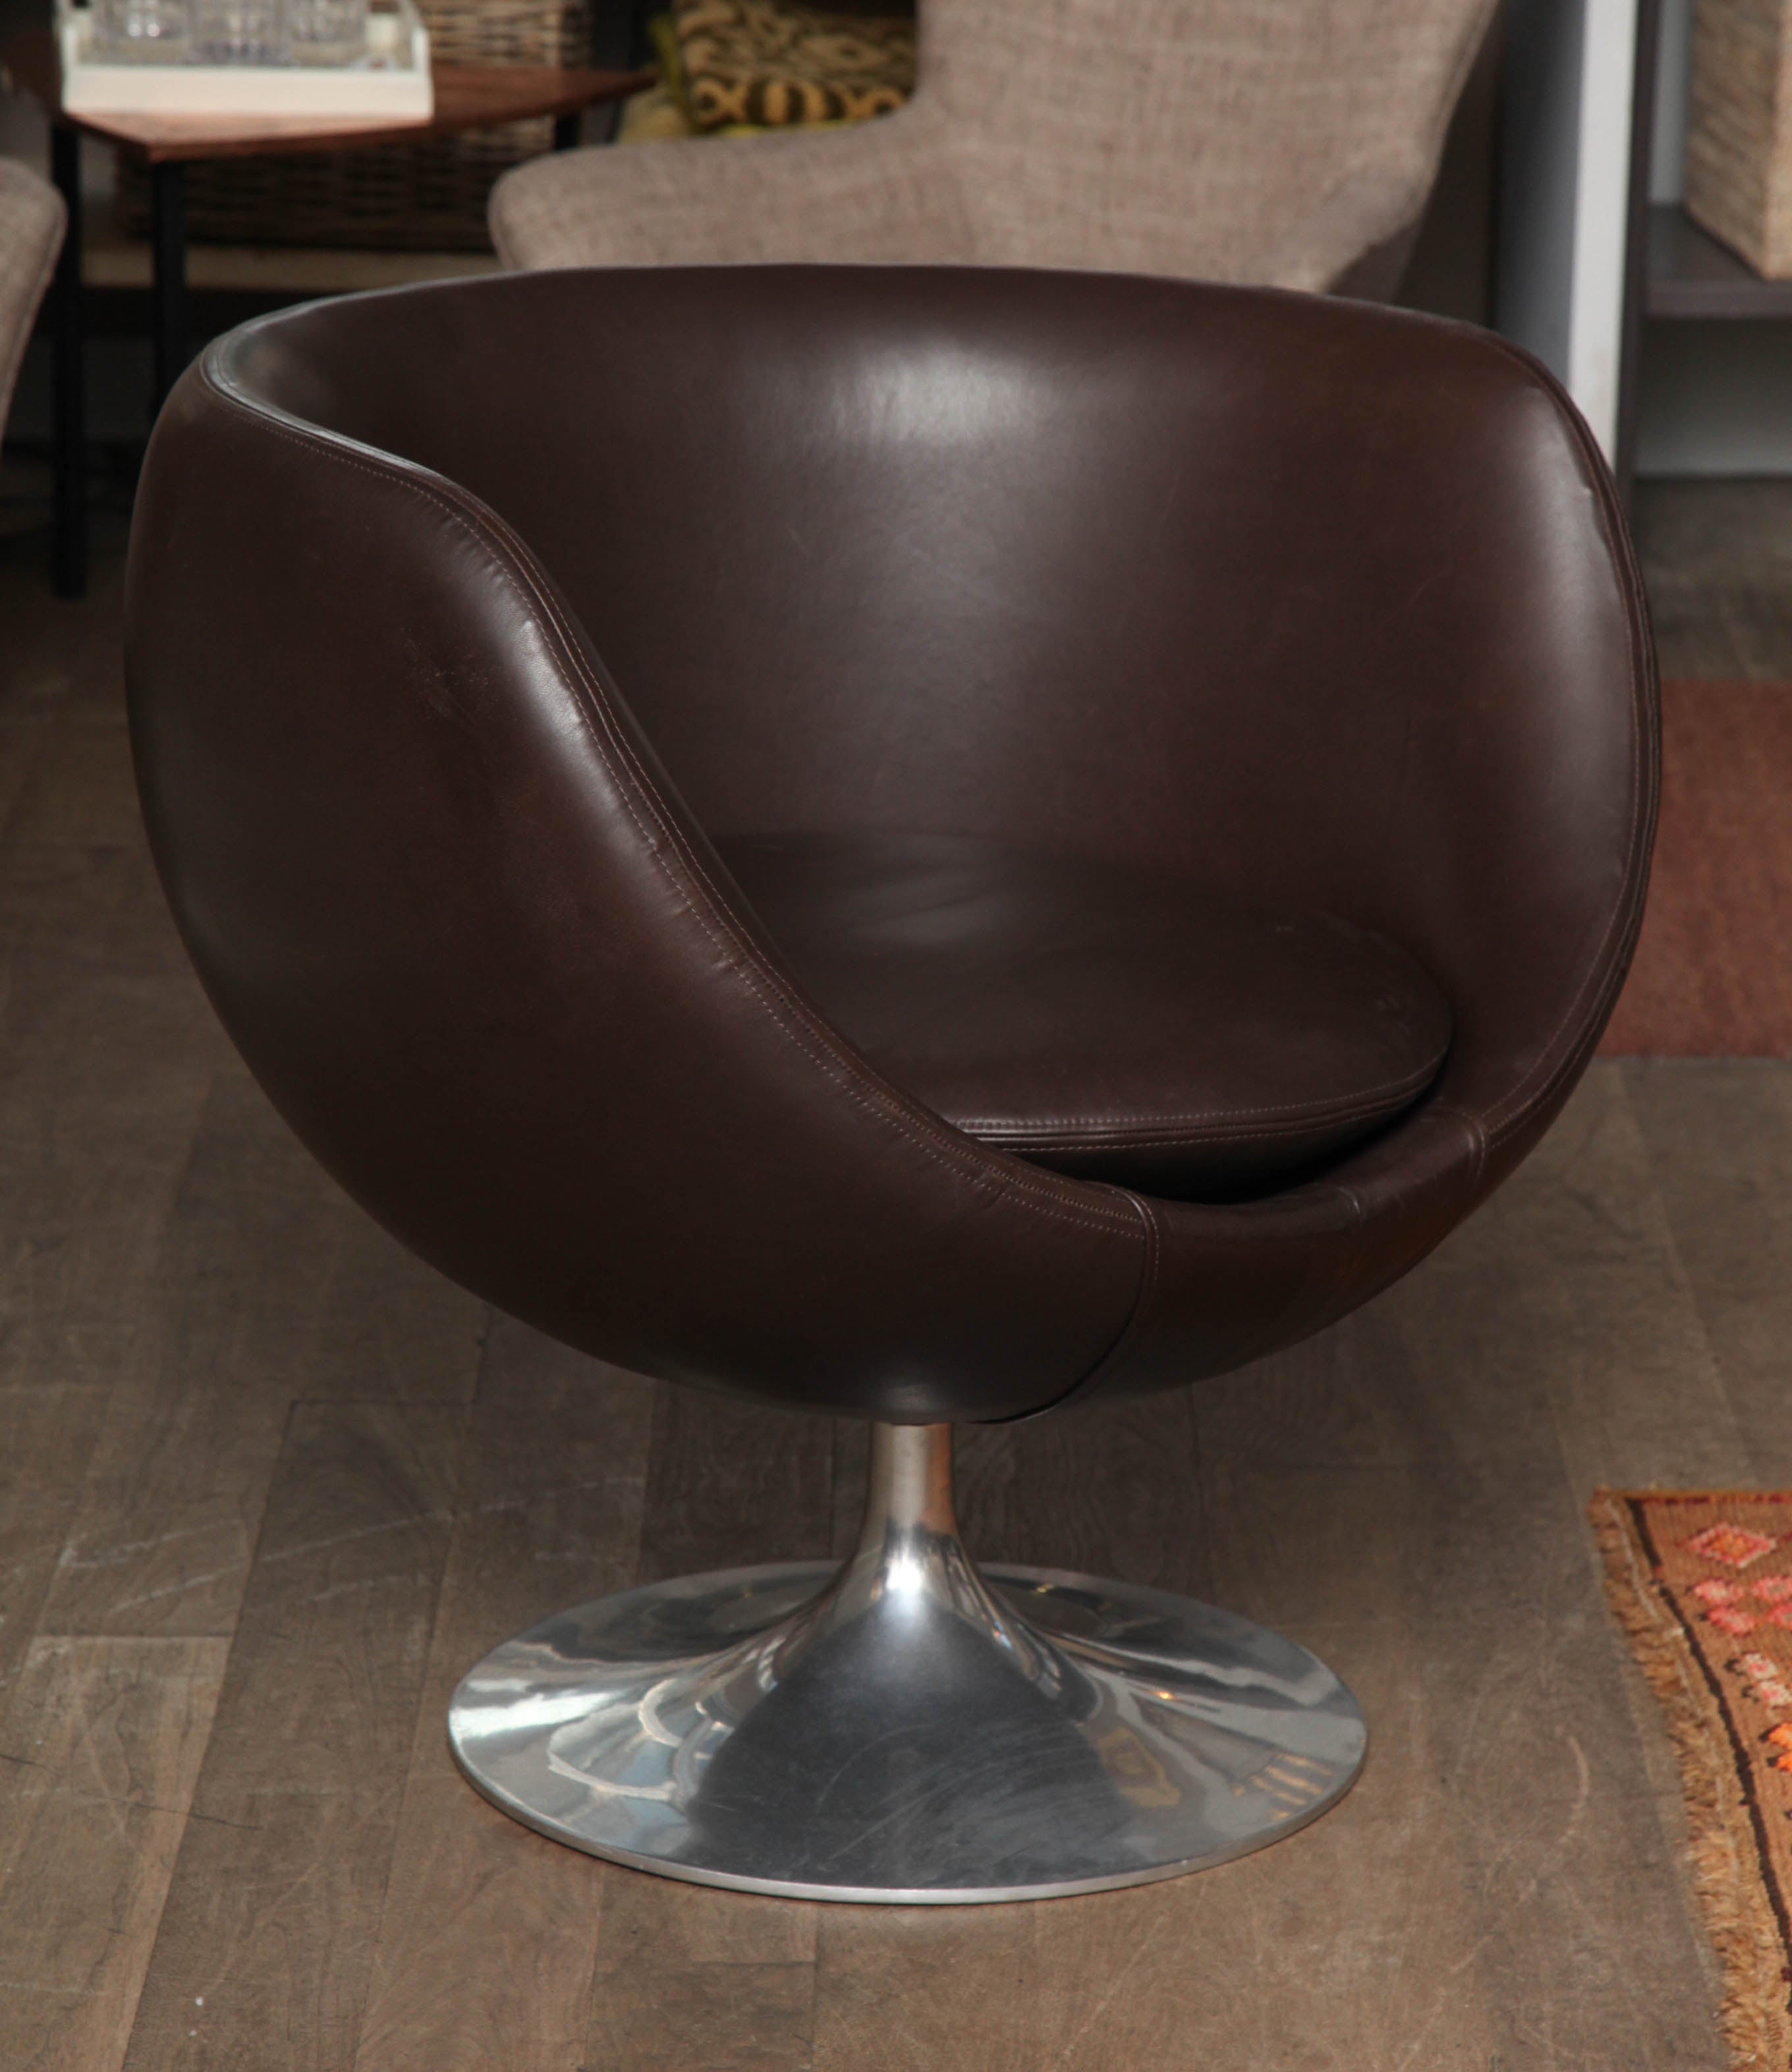 Pair of Overman style swivel pod chair on spun aluminum bases circa 1960 upholstered in brown plonge leather with saddle stitching